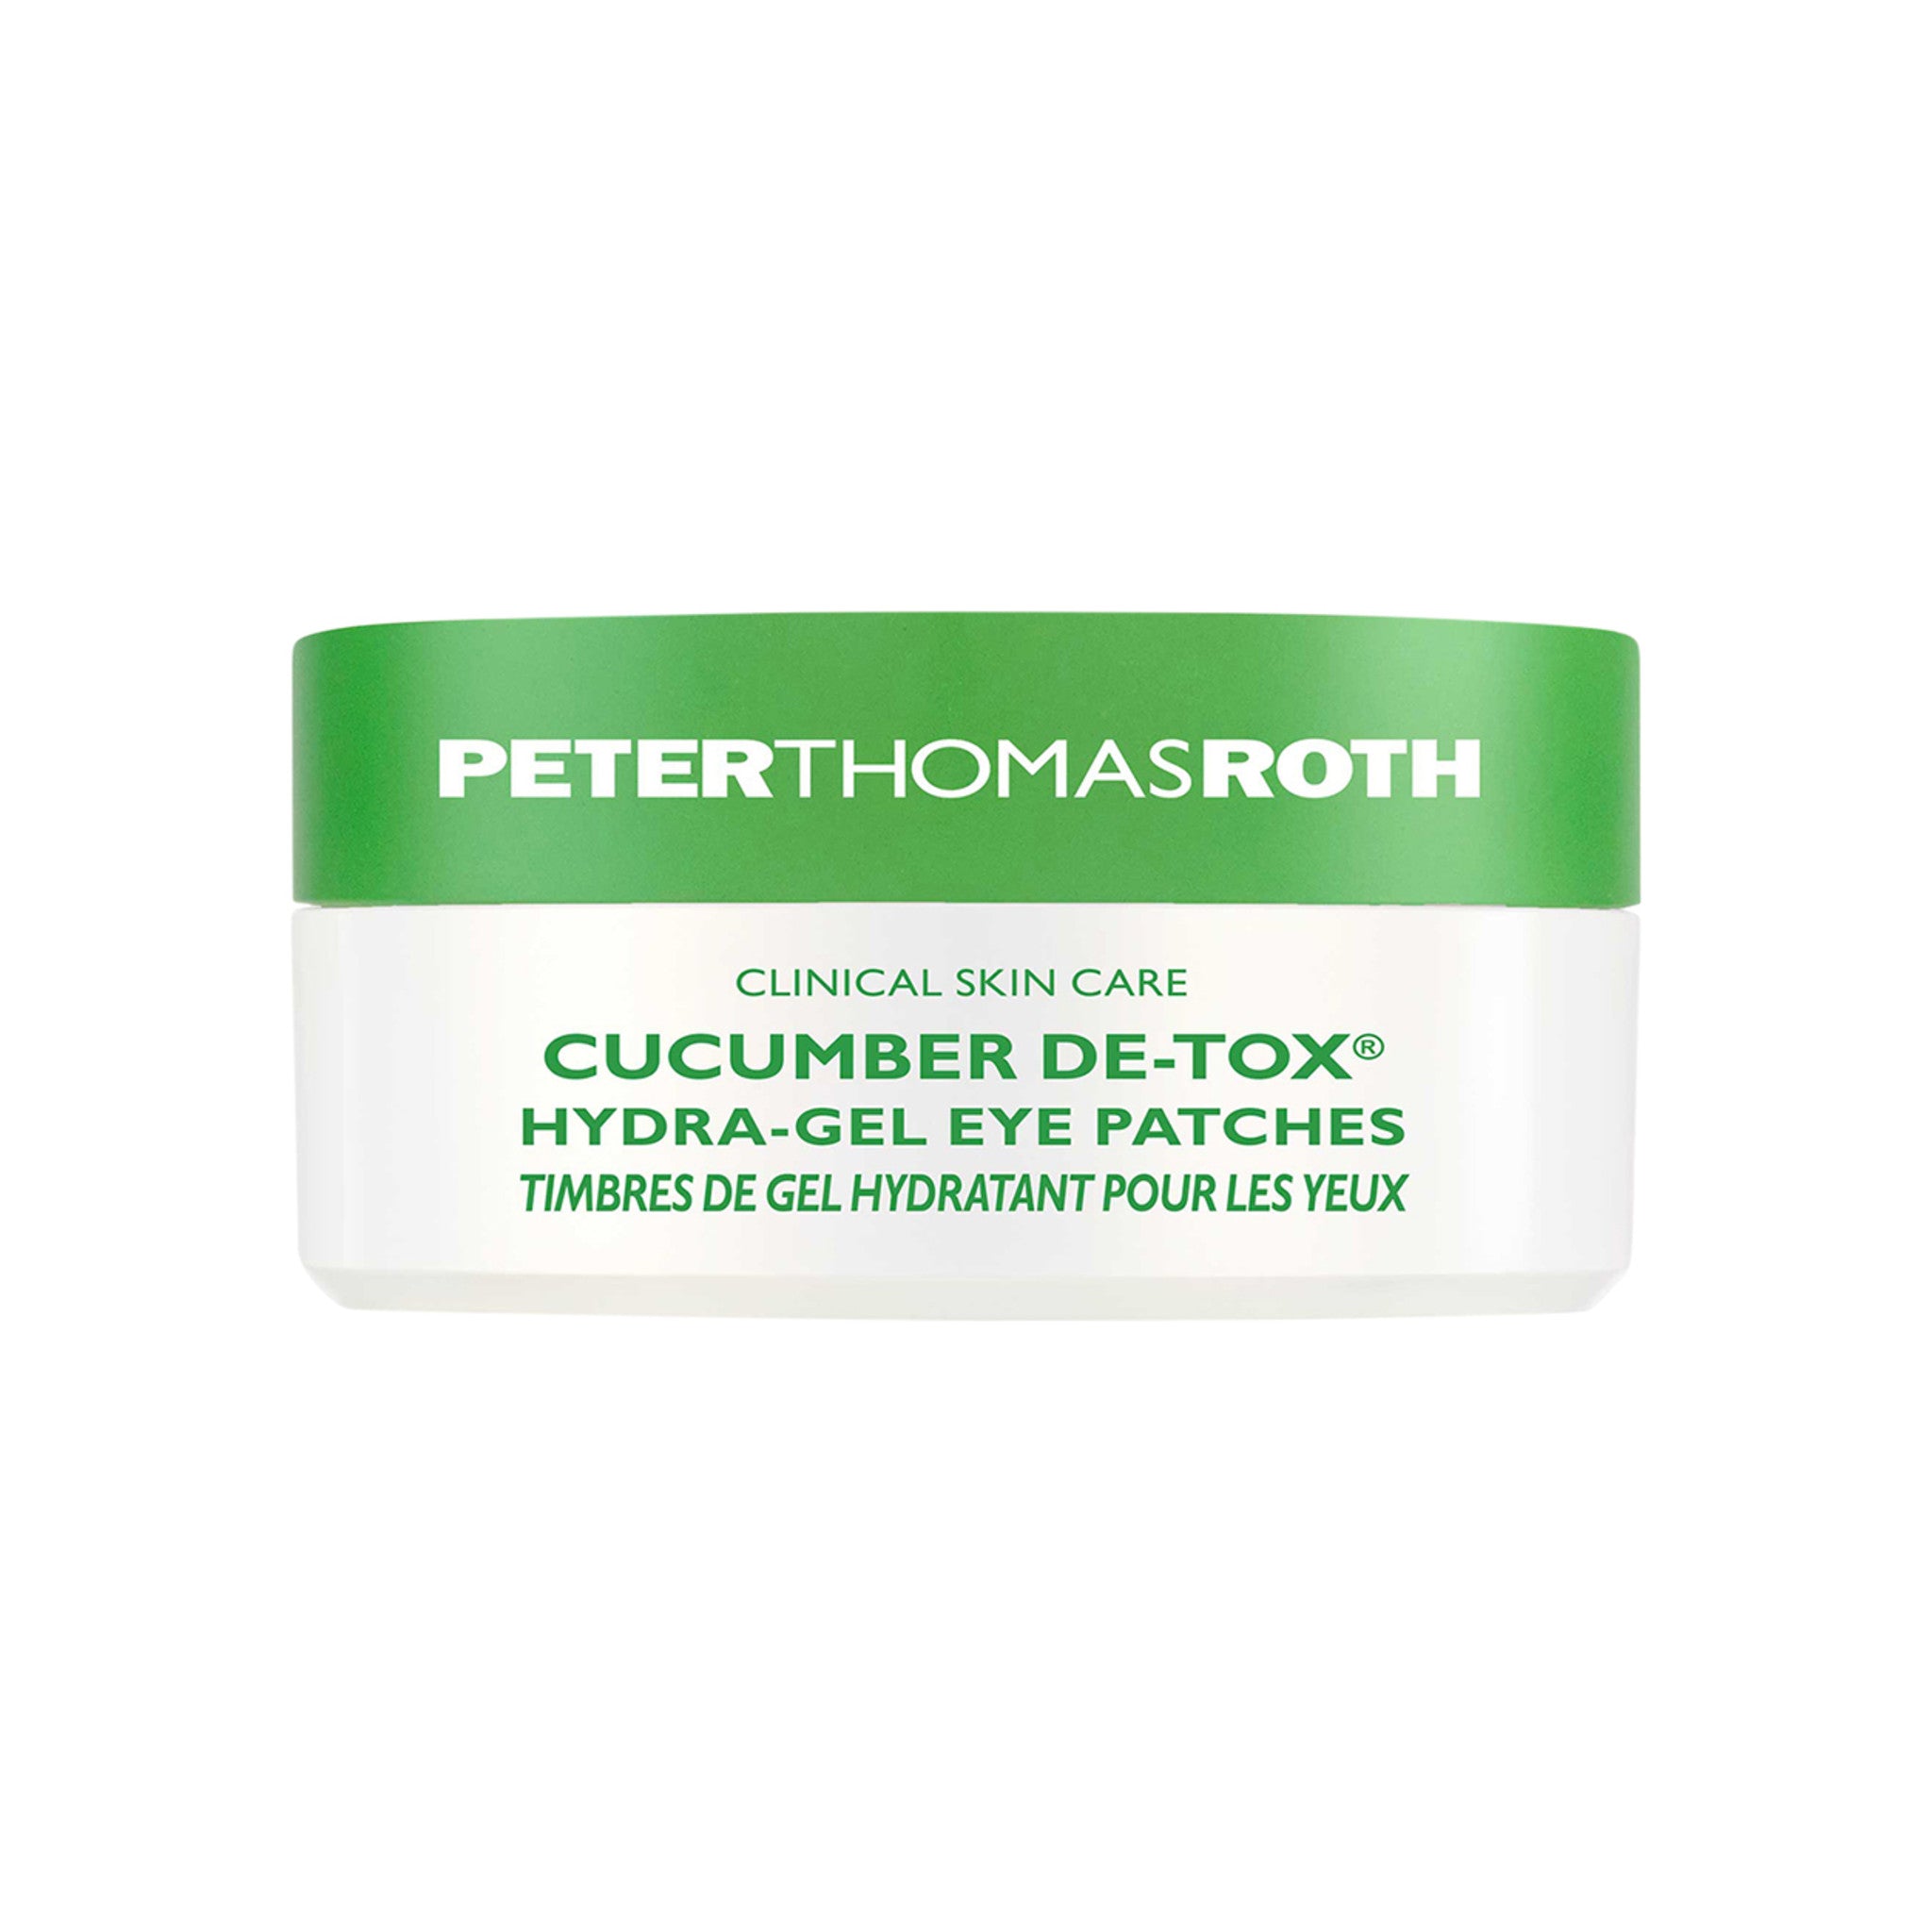 Peter Thomas Roth Cucumber De-Tox Hydra-Gel Eye Patches main image.